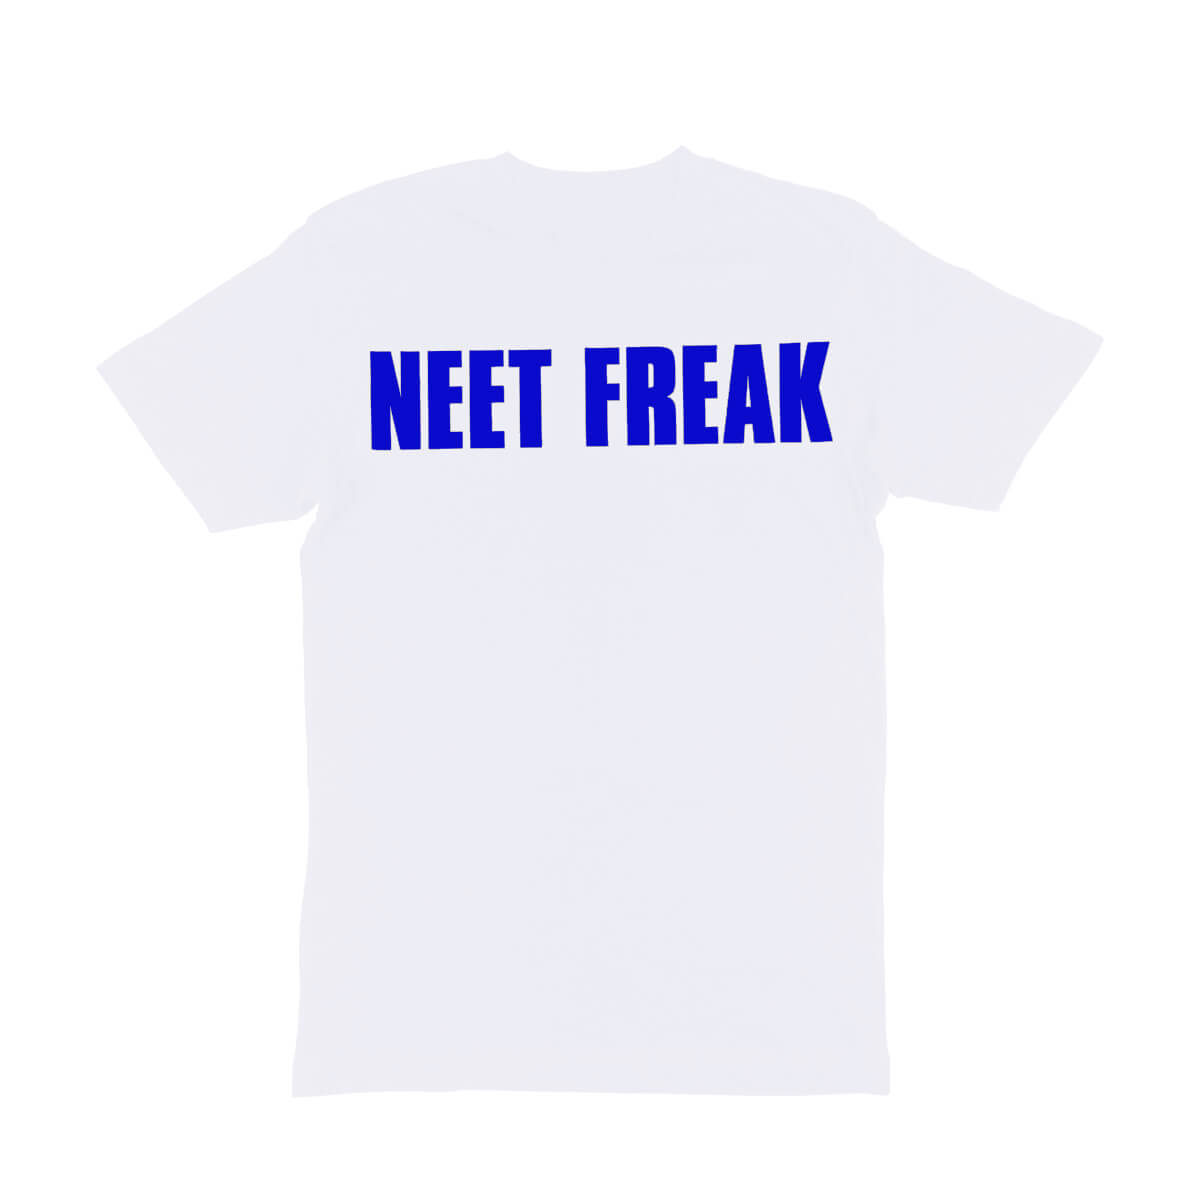 Men's T shirt White and Blue